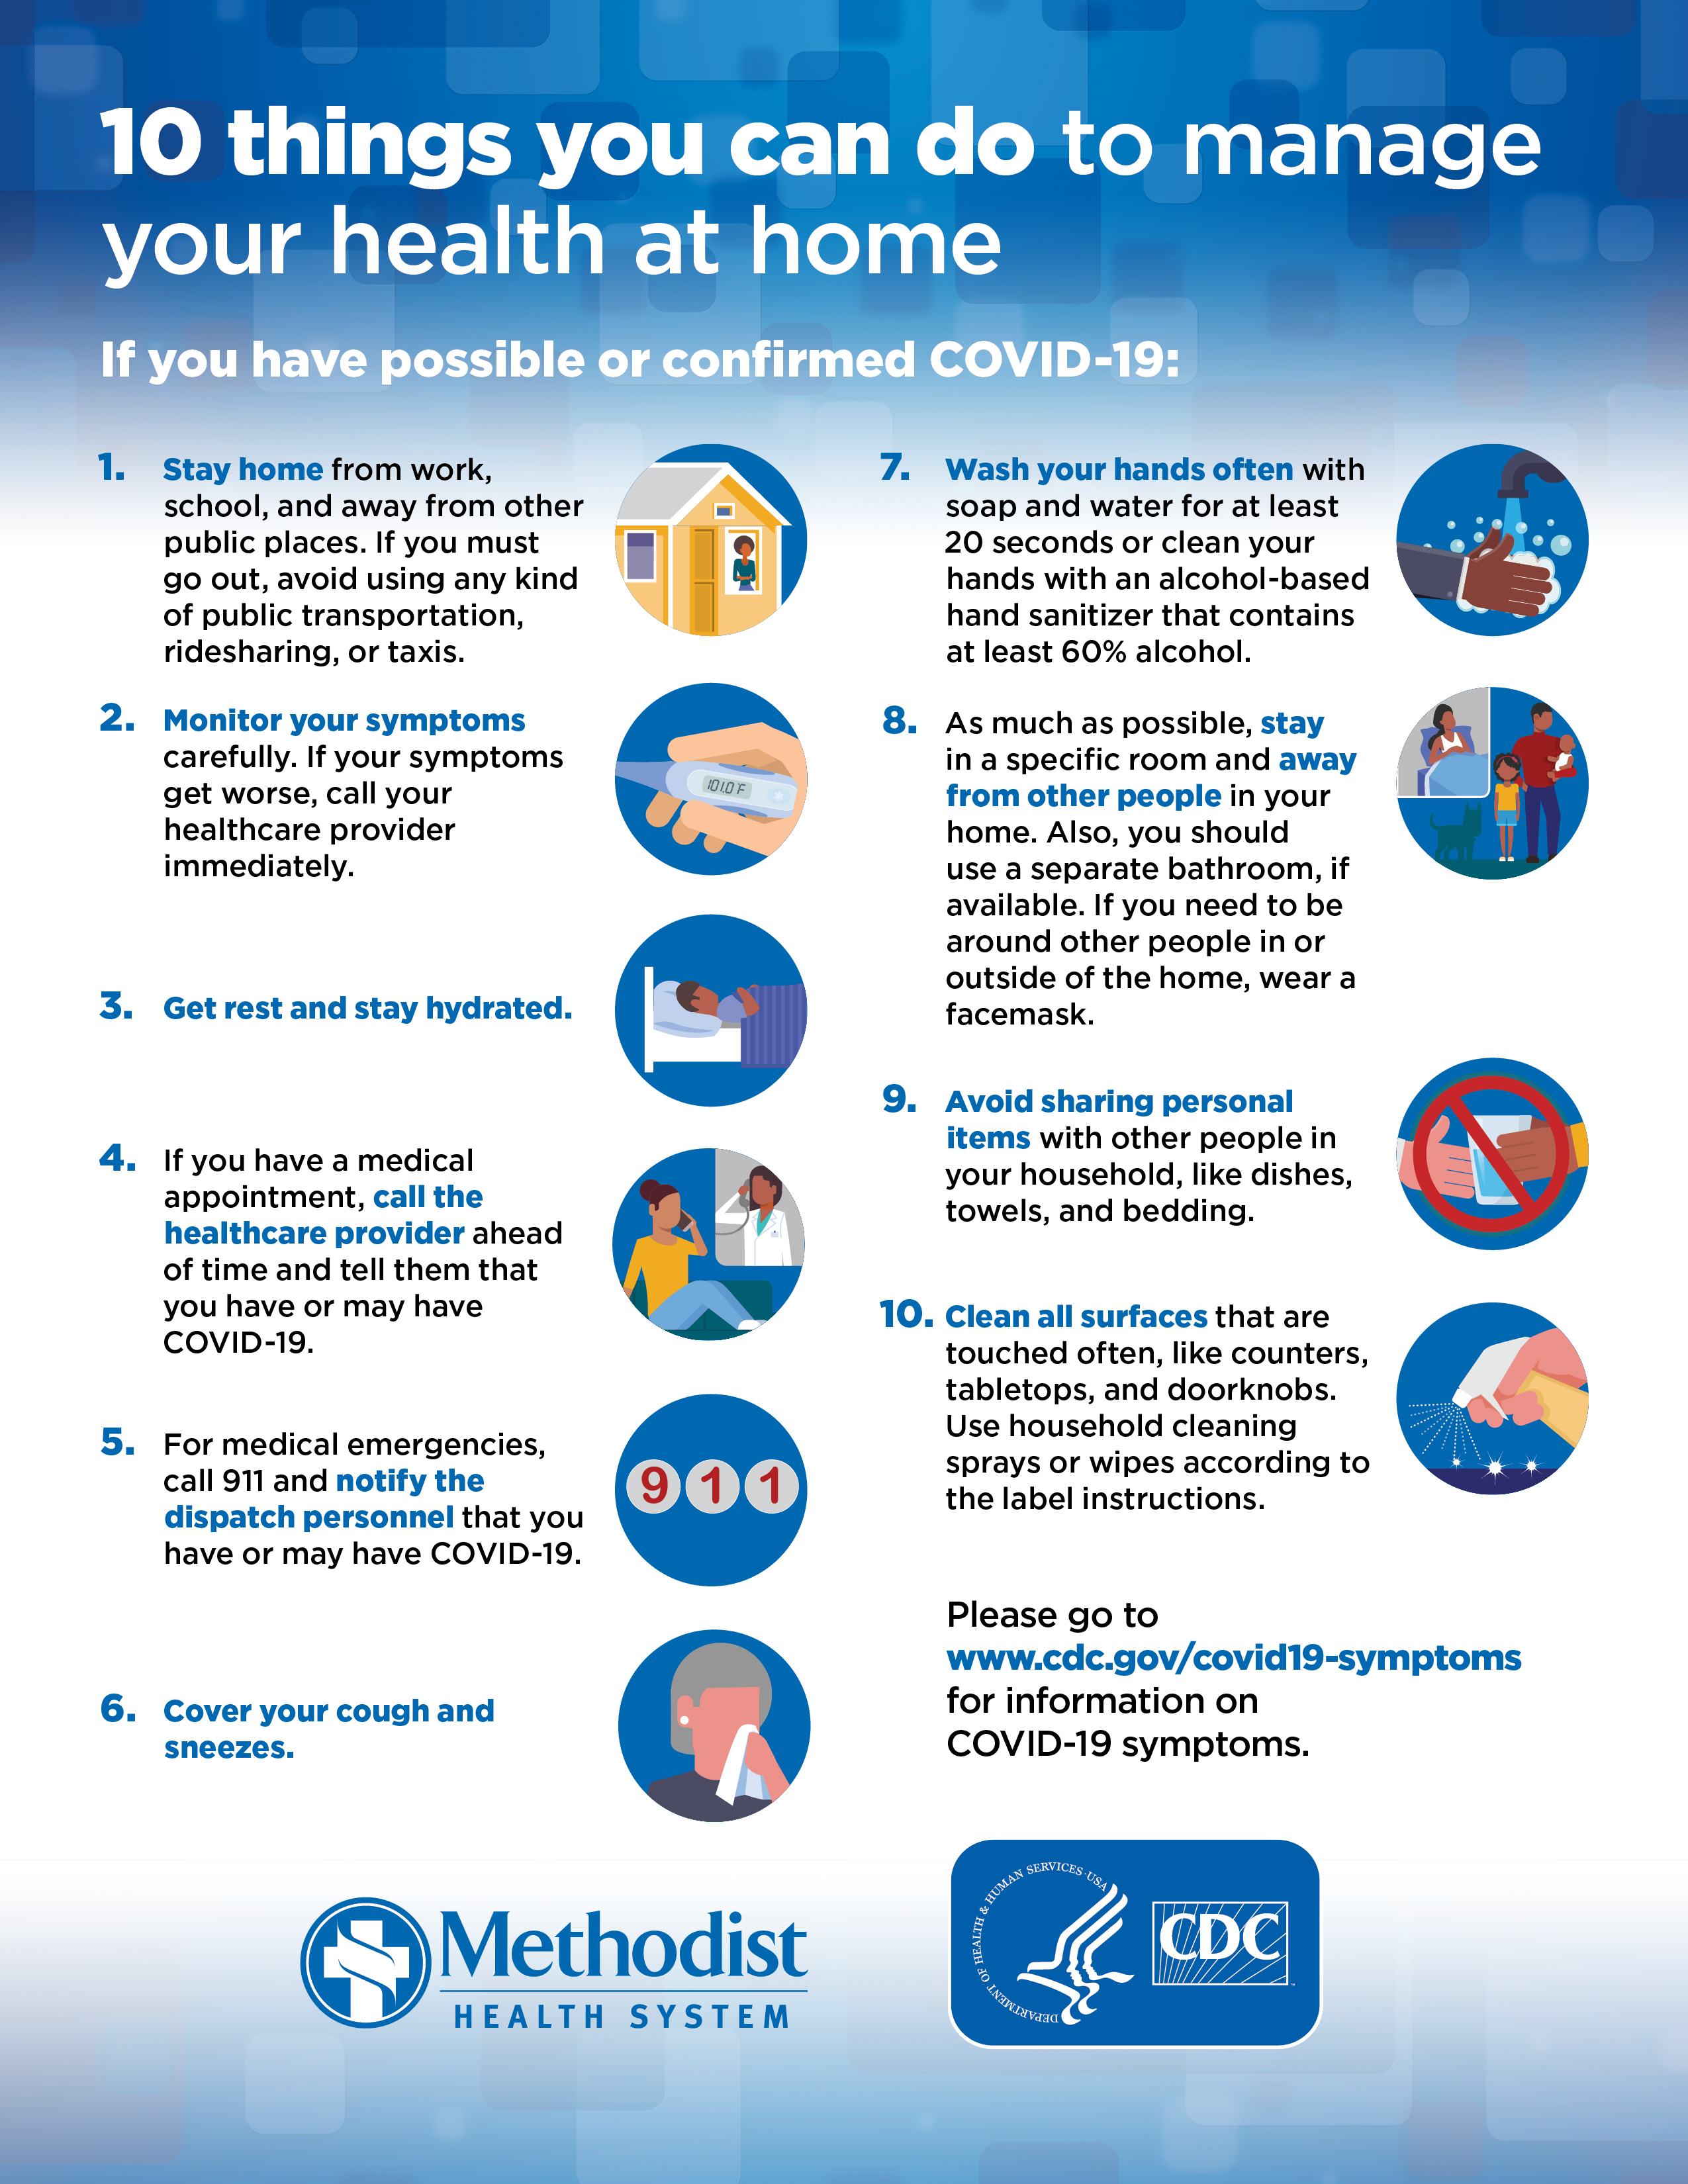 10 Things You Can Do To Manage Your Health at Home Infographic